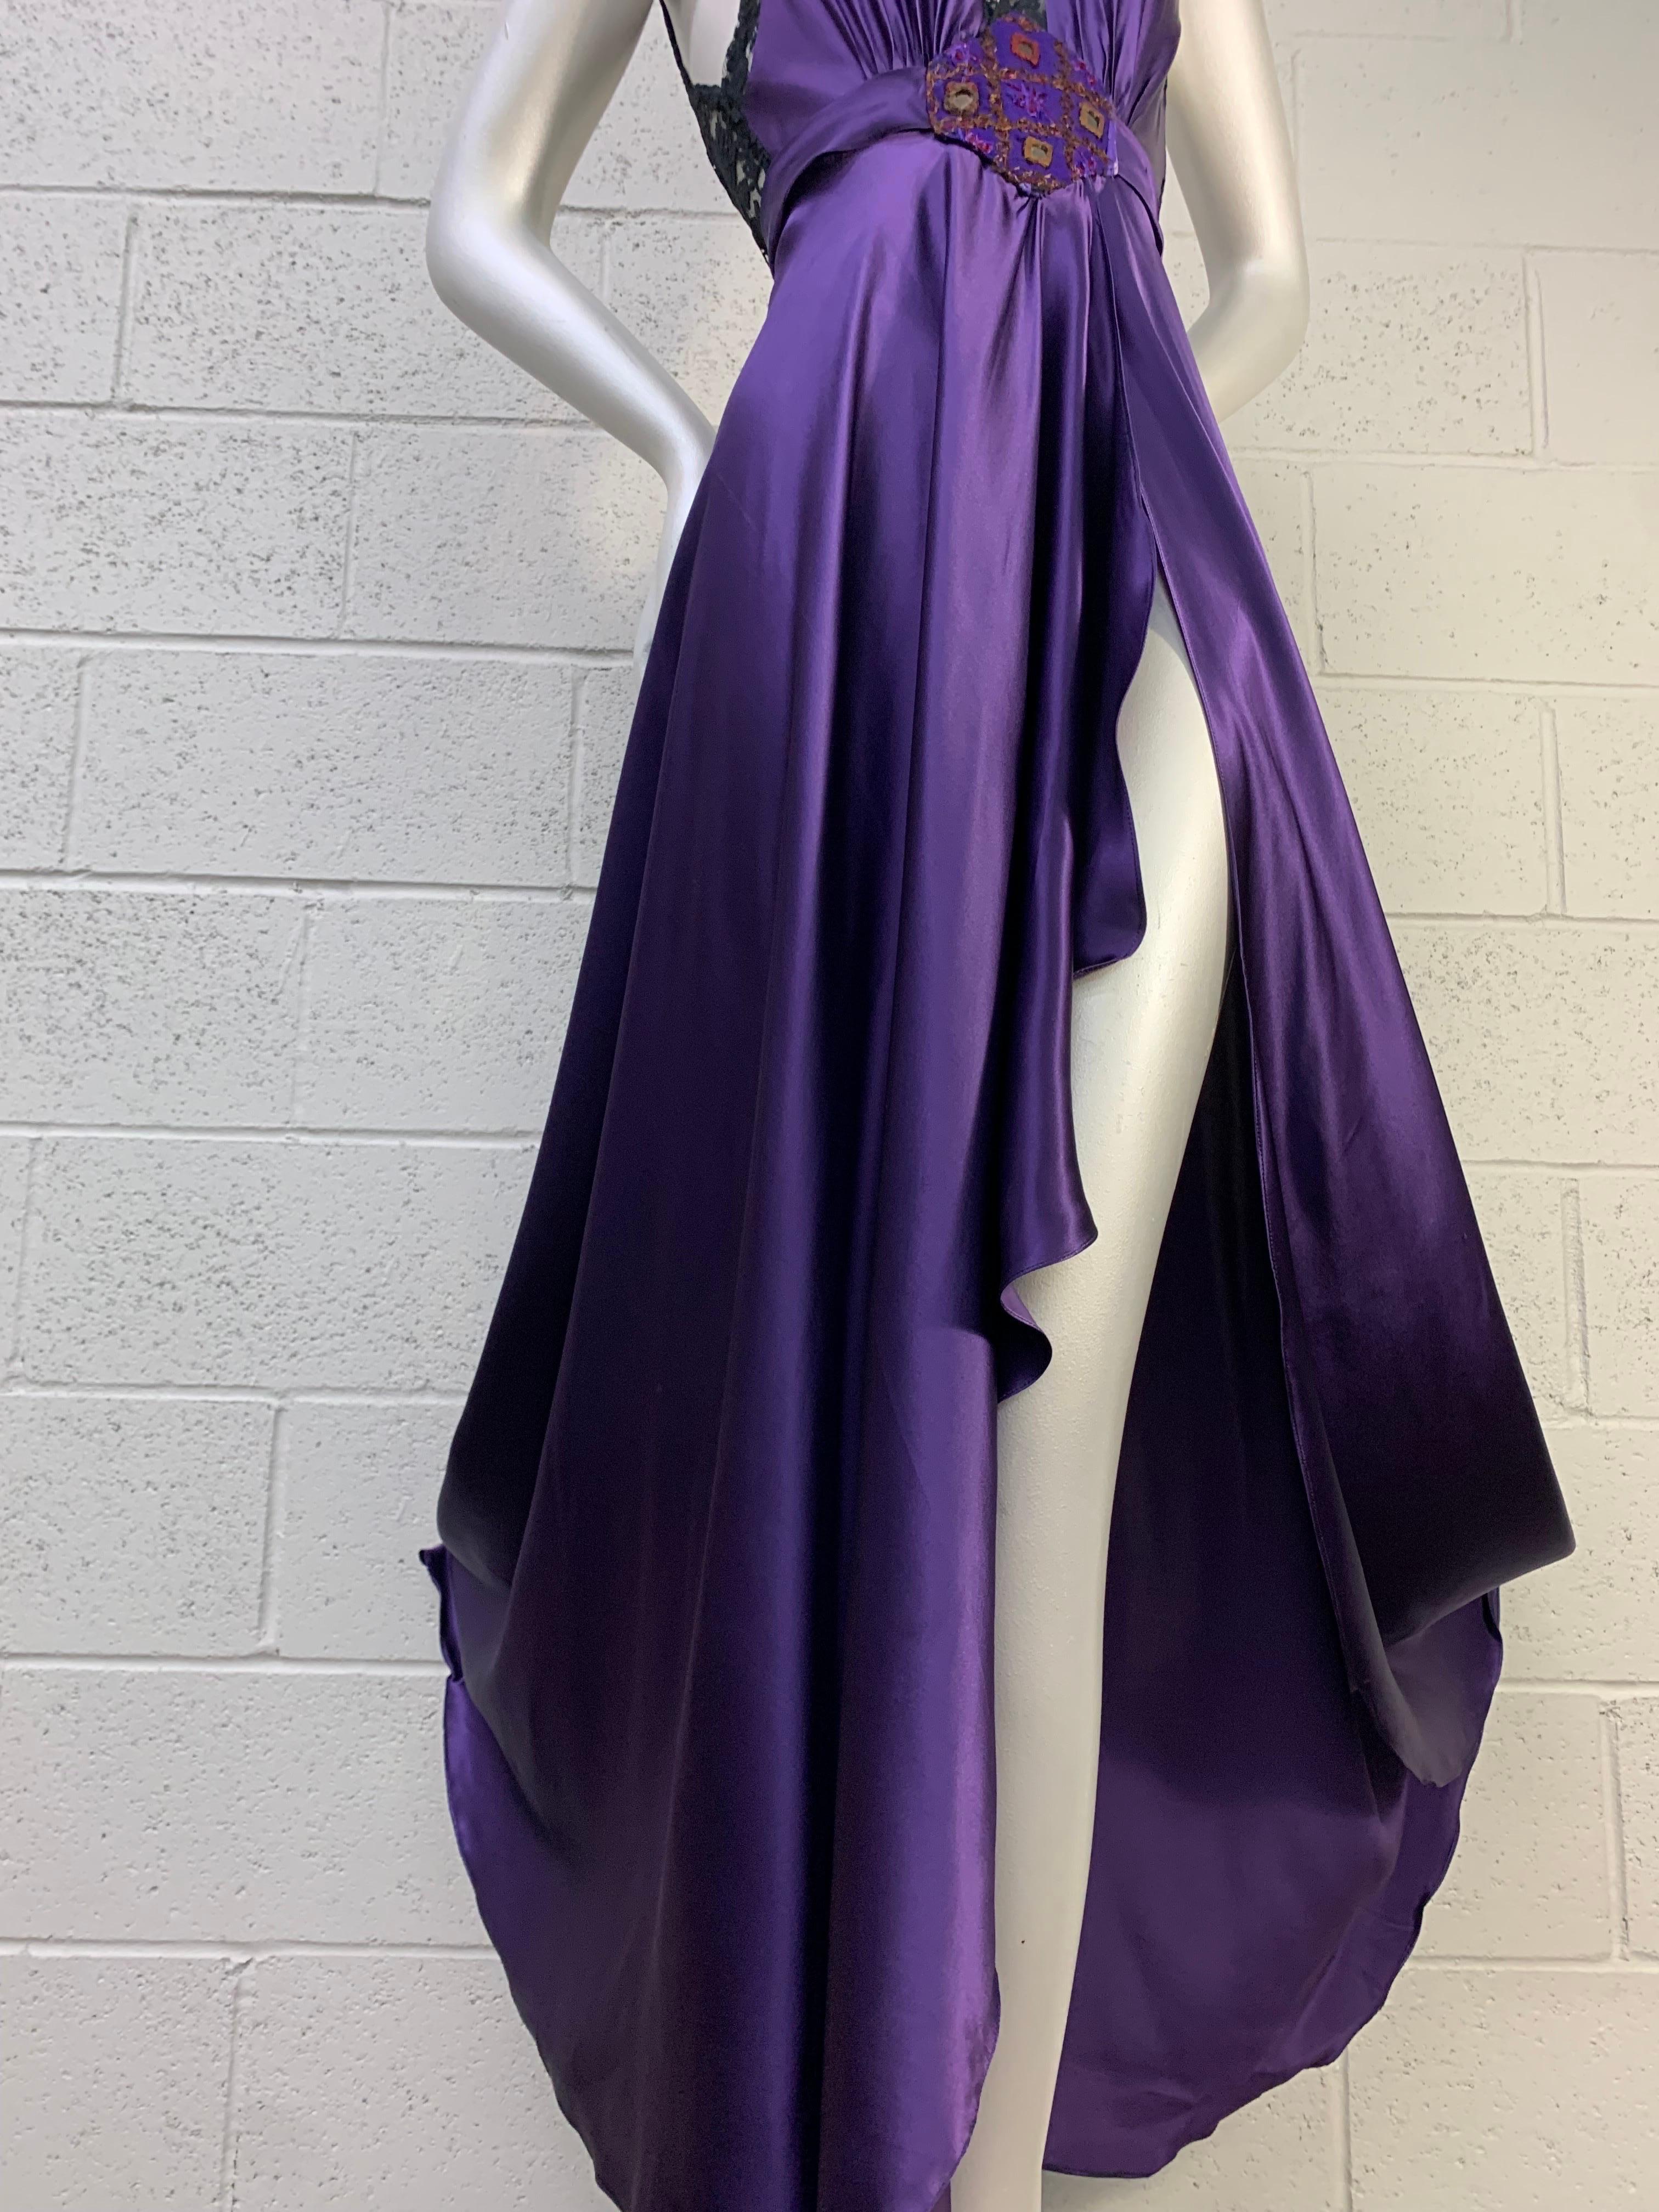 Torso Creations Royal Silk Slip Dress w Hi-Low Hem & Lace Inset & Mirror Details In New Condition For Sale In Gresham, OR